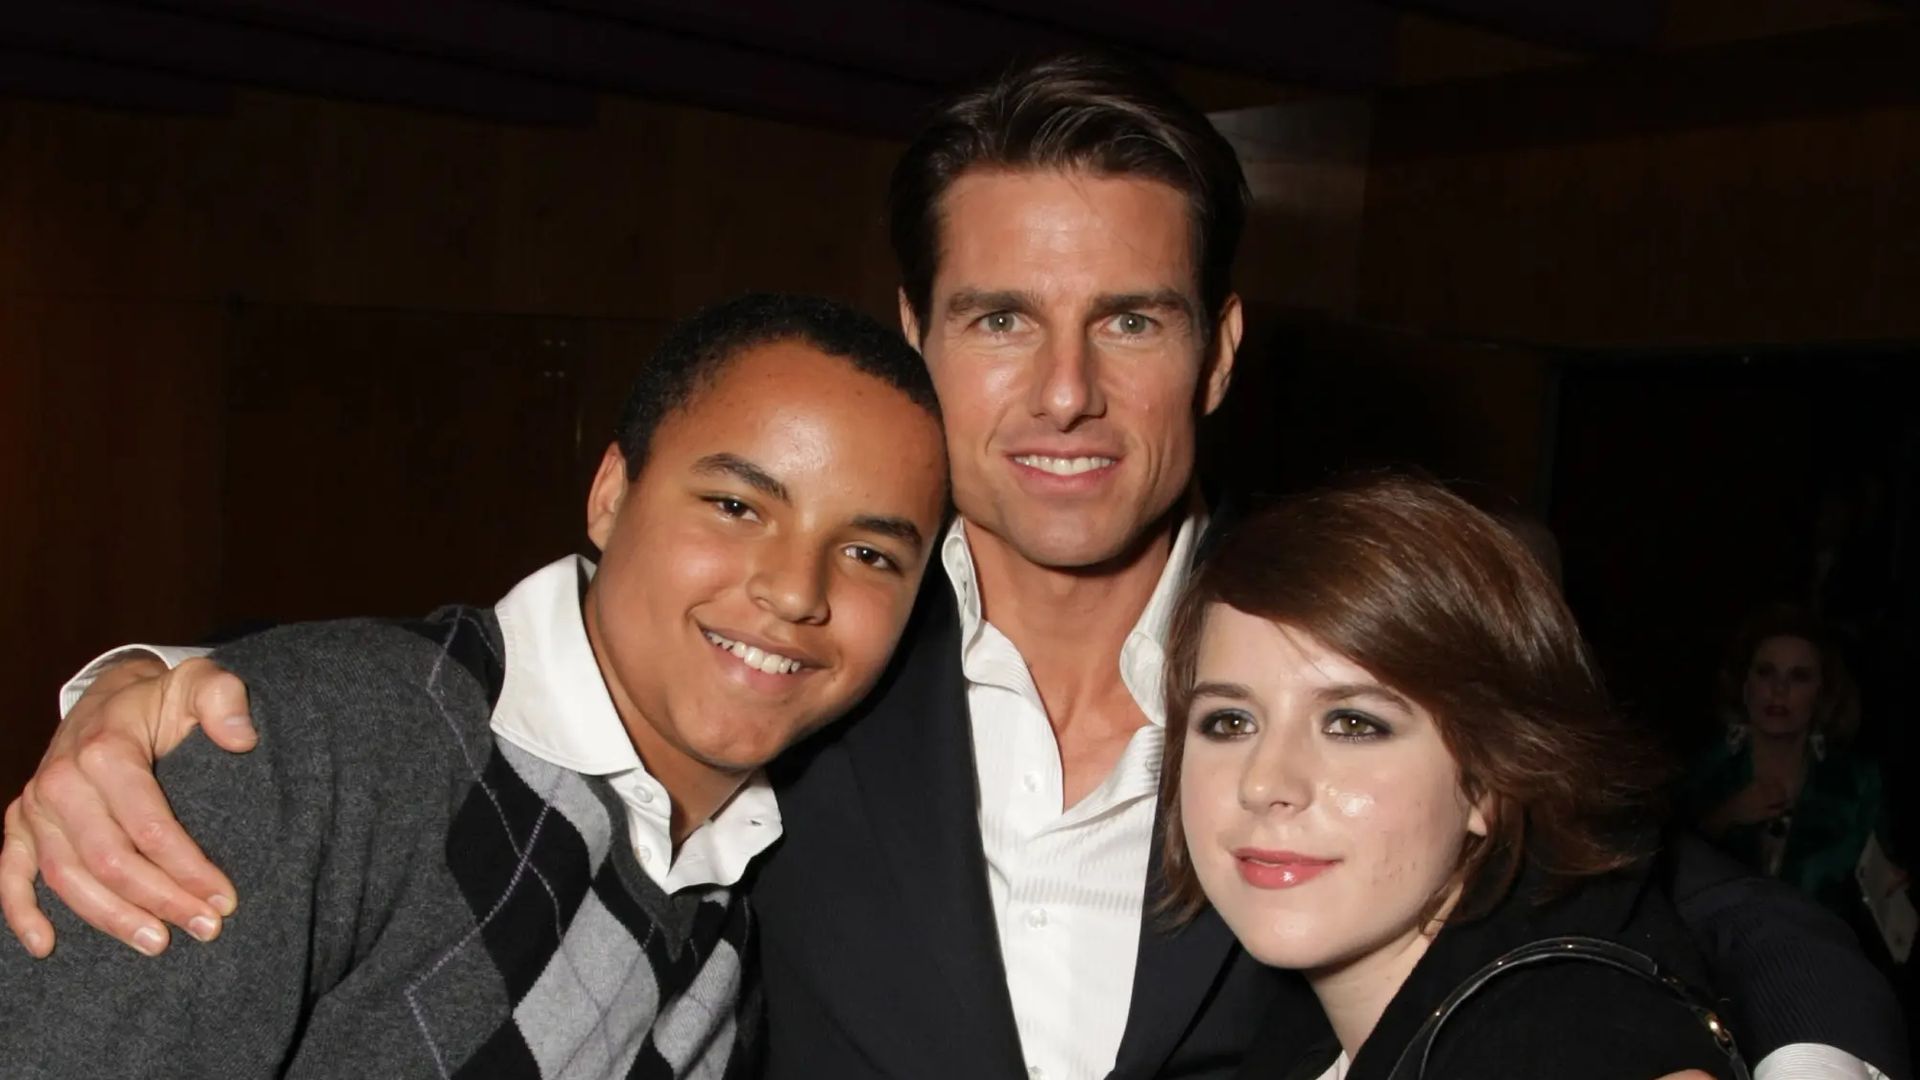 Tom Cruise poses with his and Nicole Kidman’s two kids Connor and Bella ...